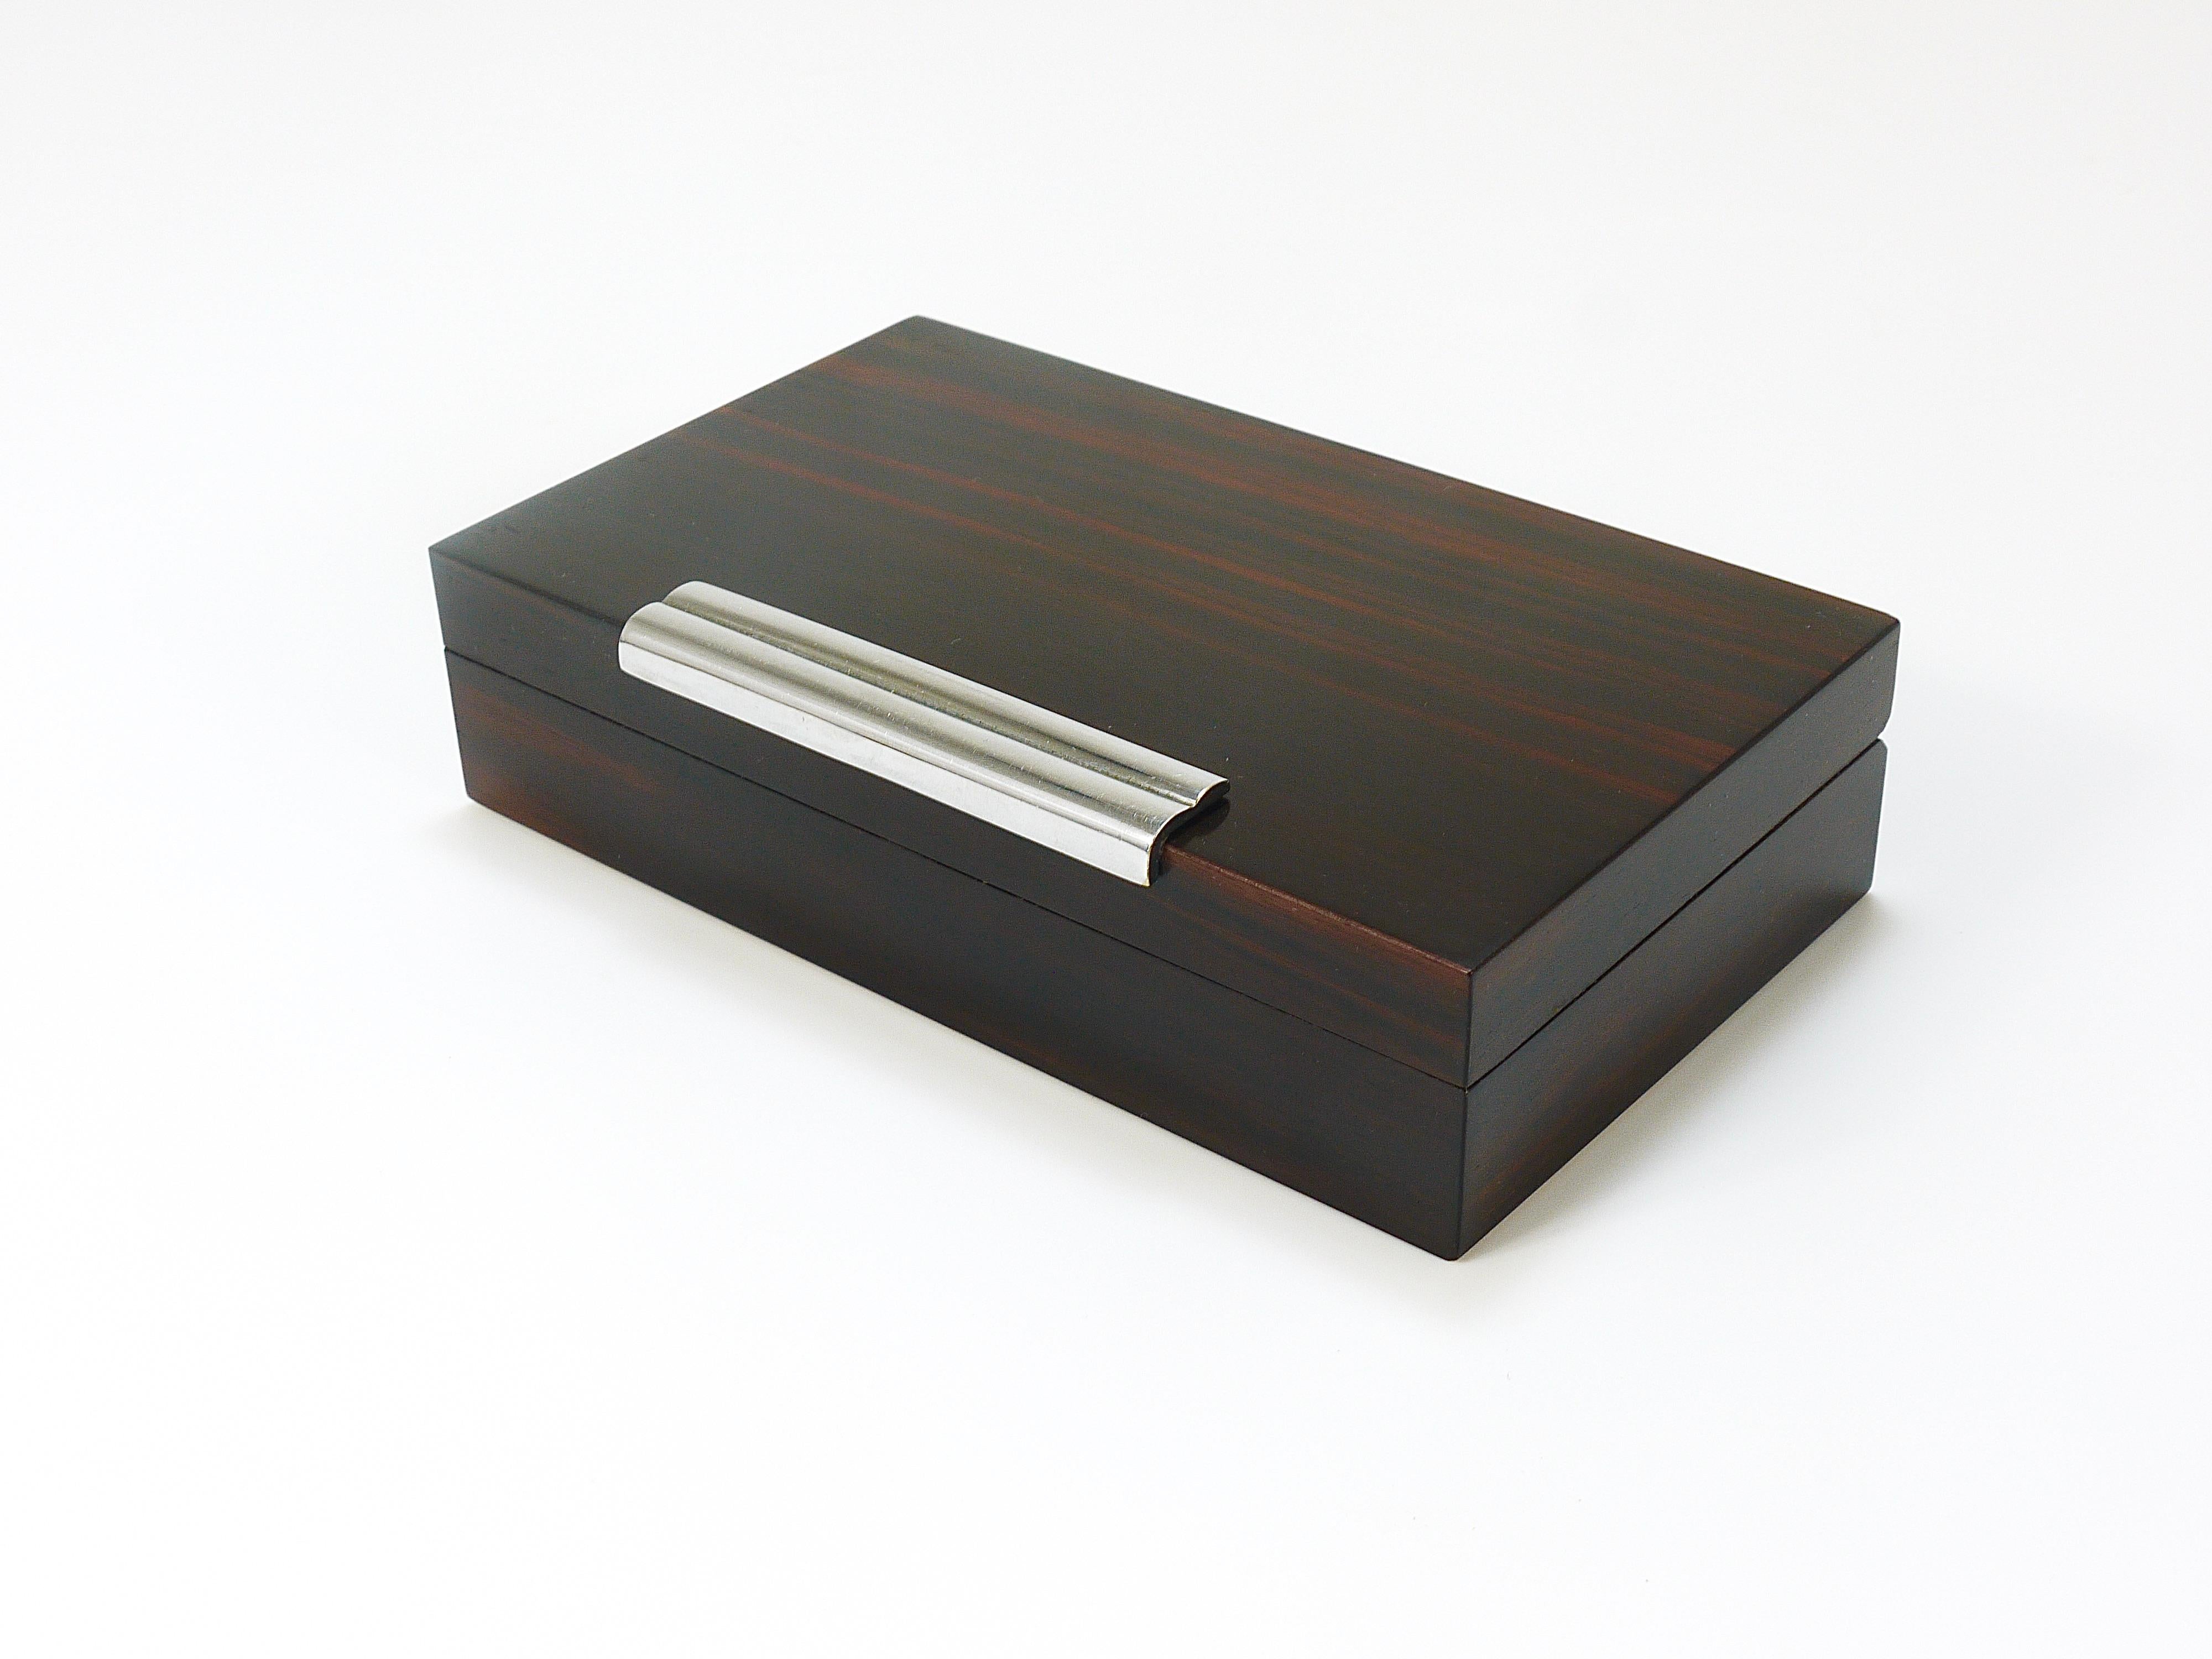 French Art Deco Rosewood & Nickel Storage Box, Maison Desny Style, France, 1930s For Sale 3